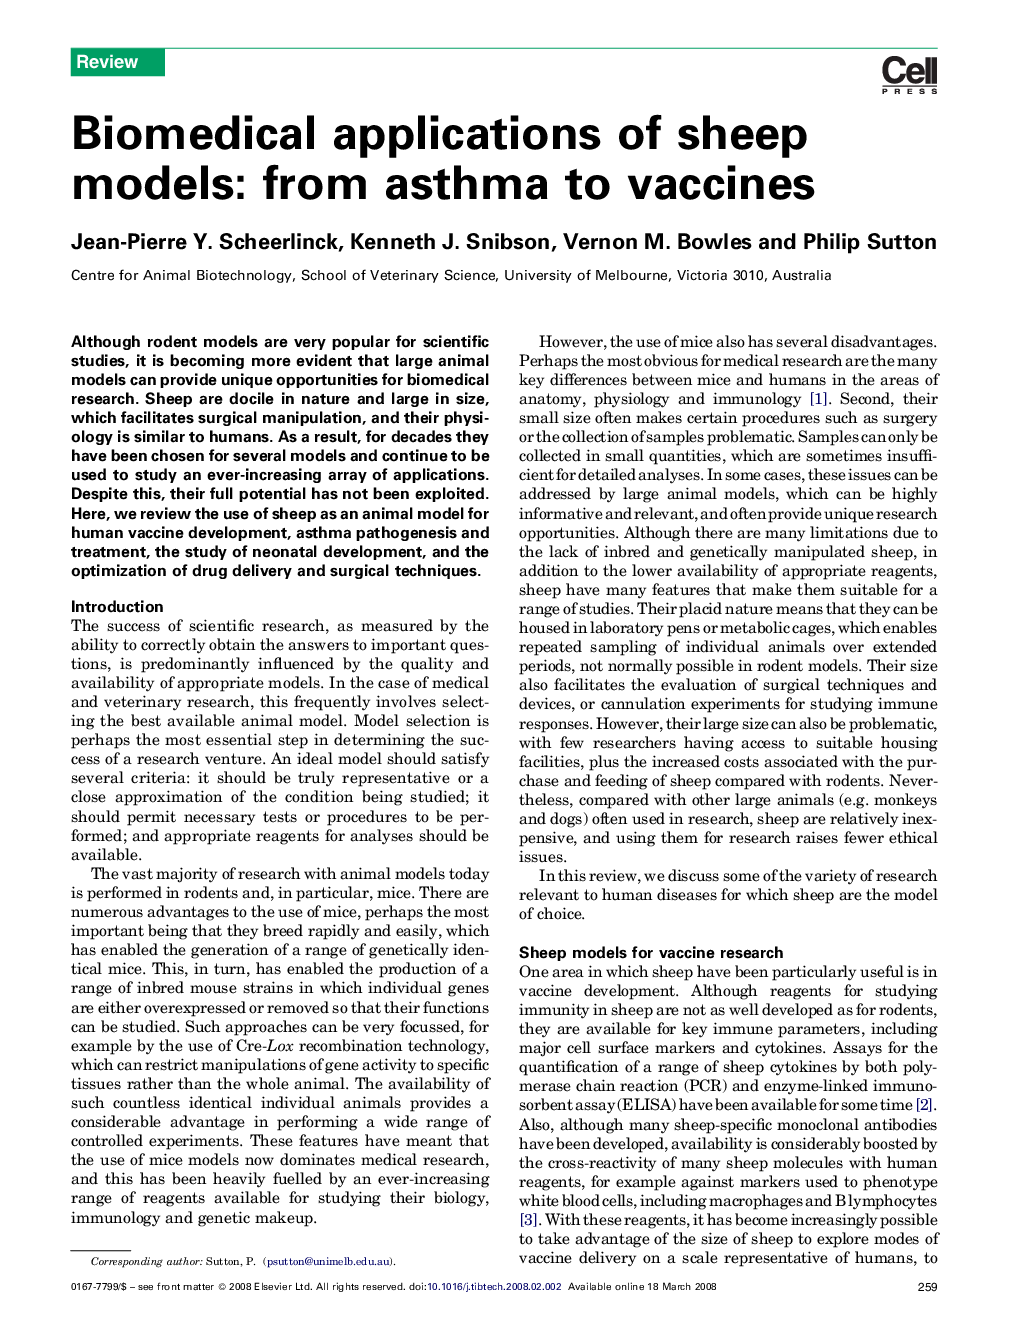 Biomedical applications of sheep models: from asthma to vaccines